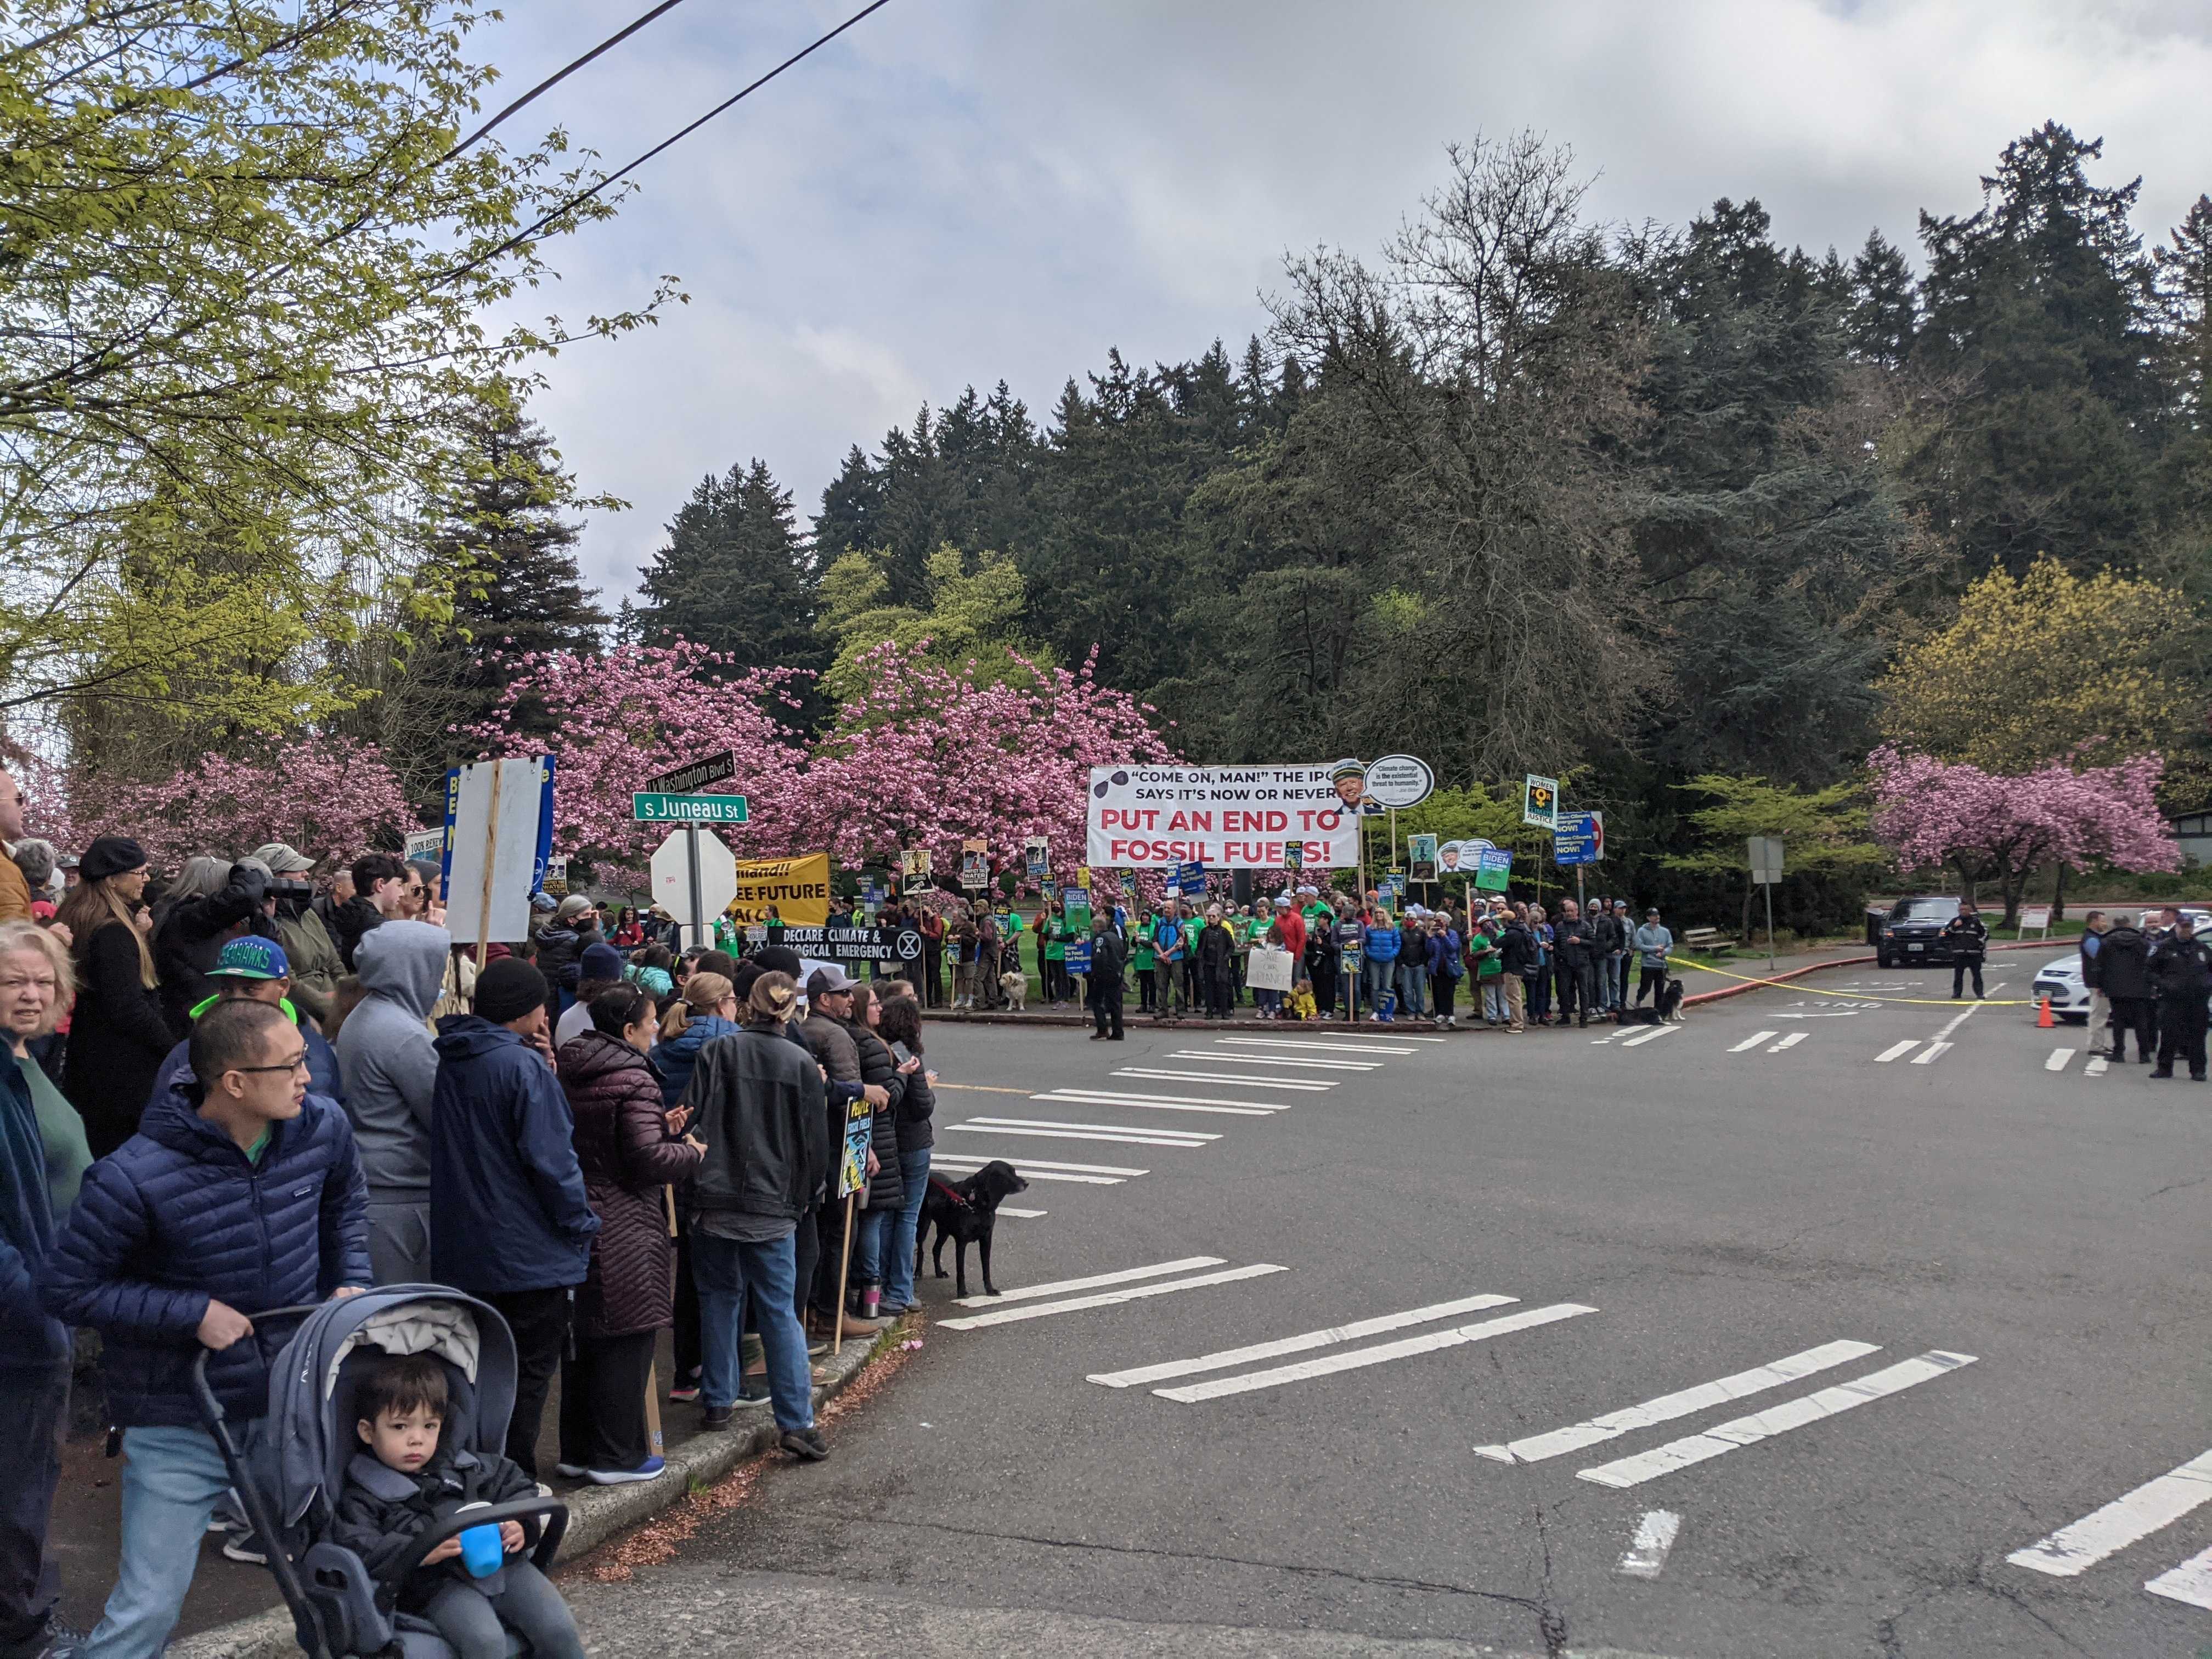 Protesters outside Seward Park call for an end to fossil fuel development ahead of President Joe Biden's Earth Day address.